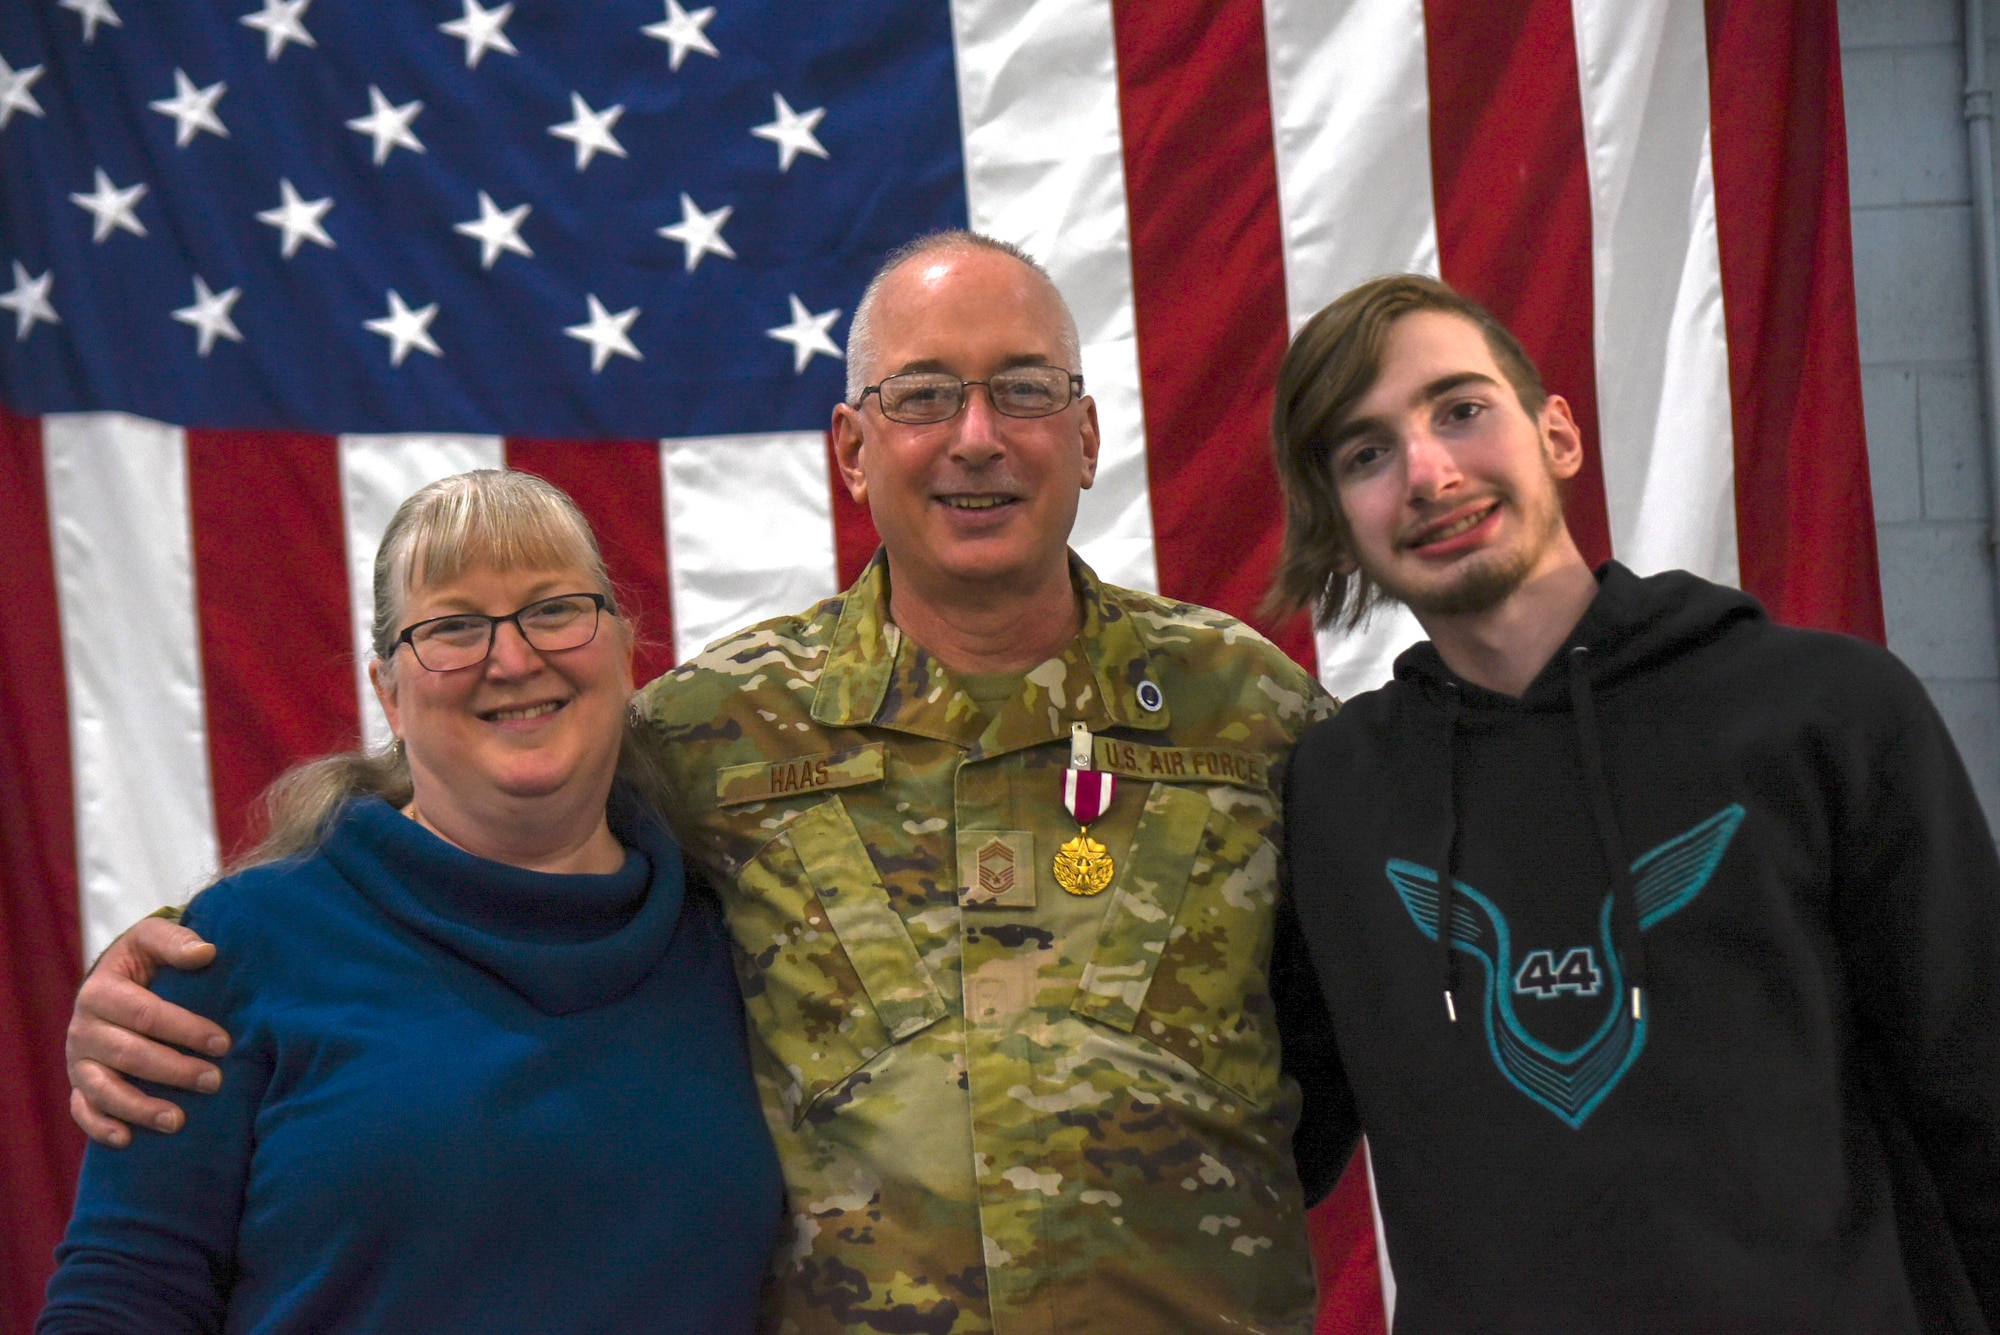 A man in an Air Force uniform poses for a picture with his wife and his young adult son.